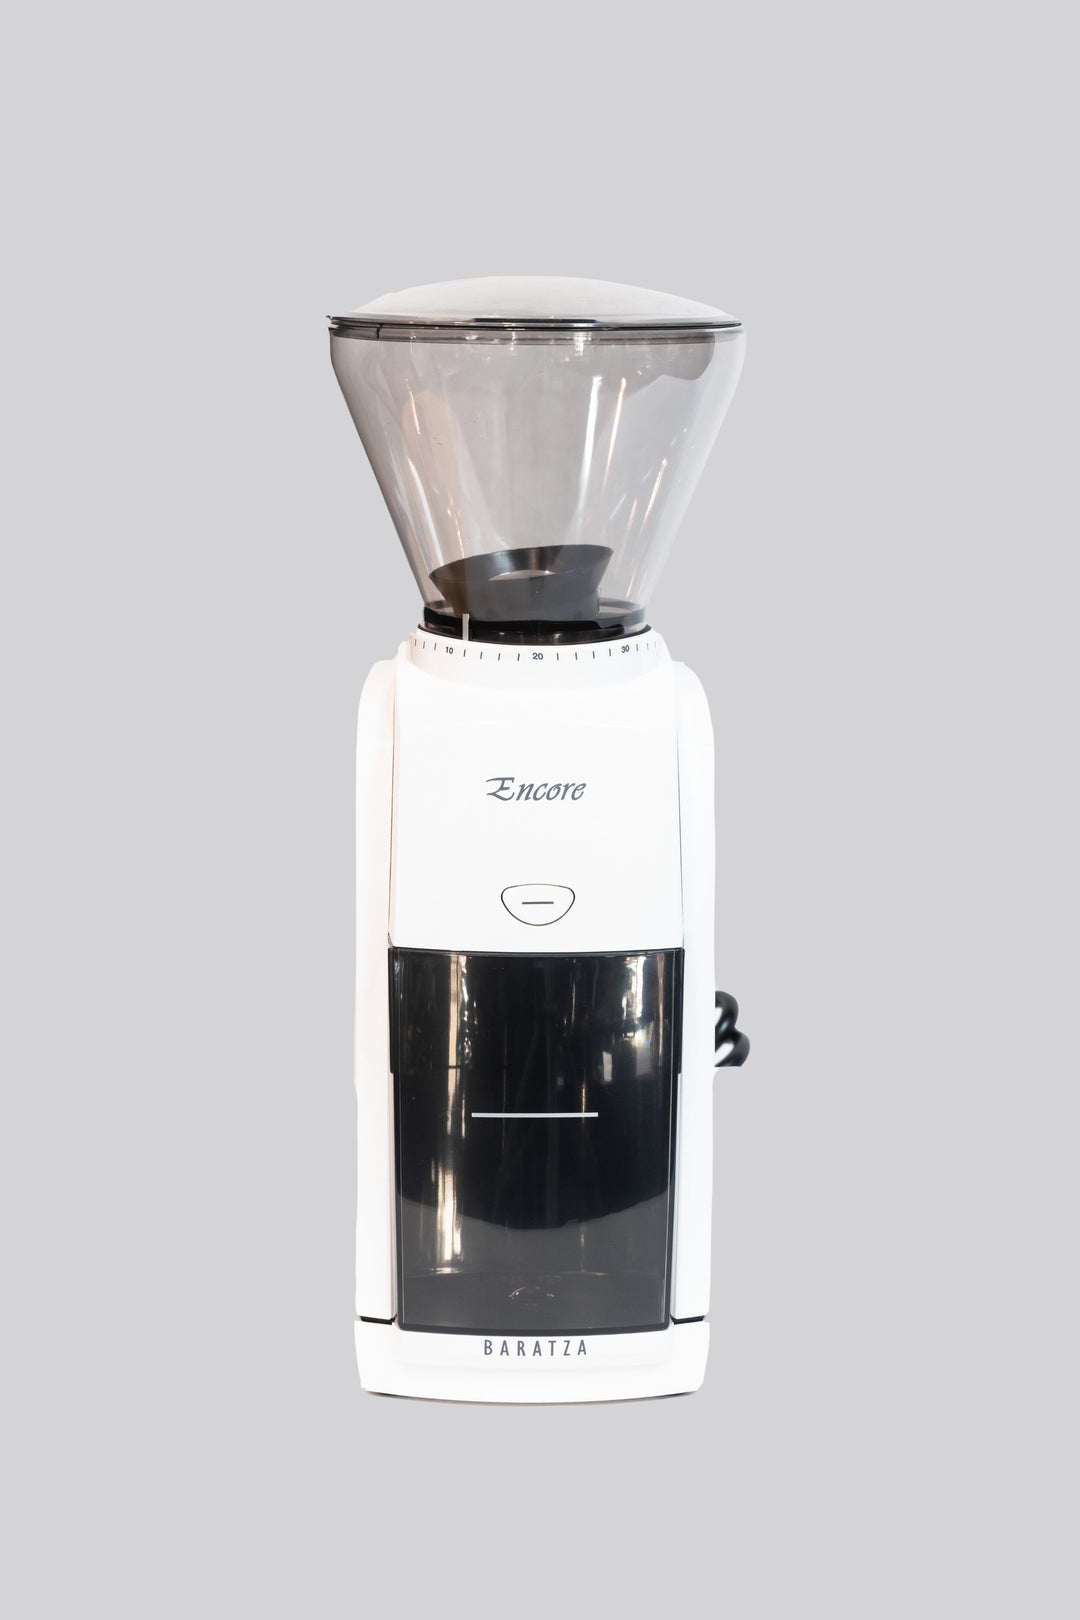 The Baratza Encore Grinder Review: Is It Still The Best?